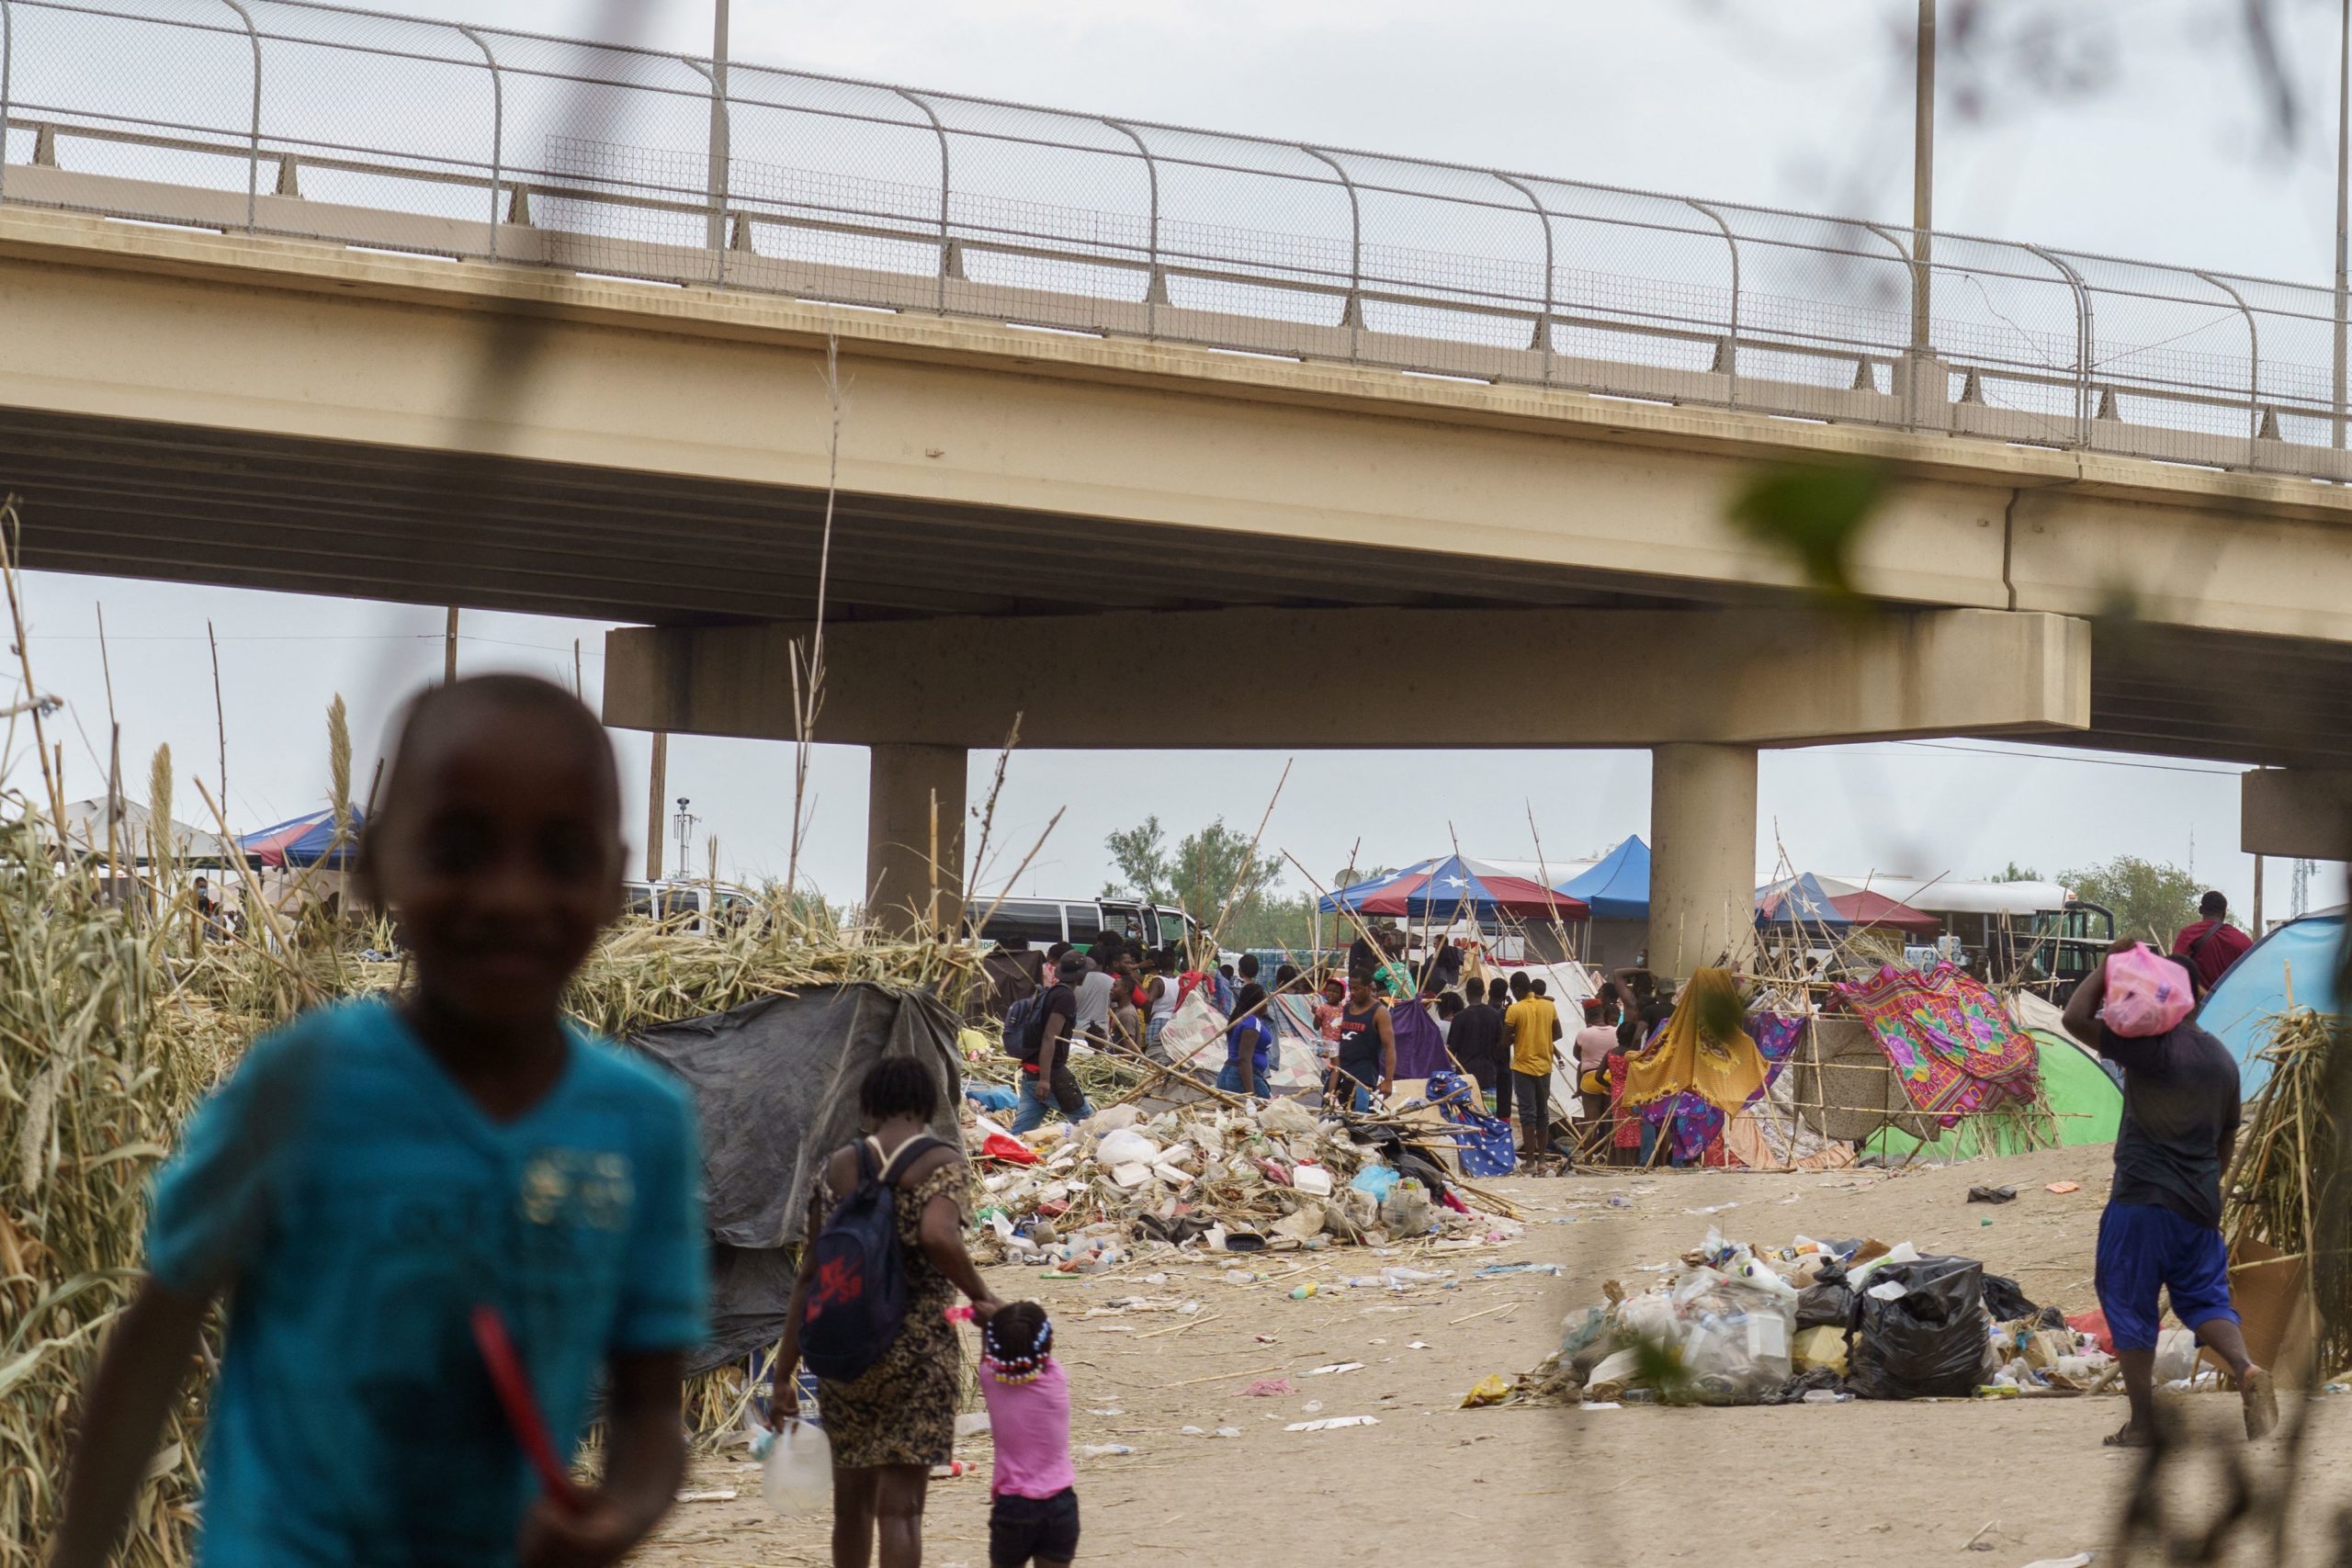 Haitian migrants are pictured in a makeshift encampment where more than 12,000 people hoping to enter the United States await under the international bridge in Del Rio, Texas on September 21, 2021. - The United Nations expressed deep concern September 21, 2021, at mass deportations of Haitian migrants from the United States, warning they could go against international law. (Photo by PAUL RATJE / AFP) (Photo by PAUL RATJE/AFP via Getty Images)